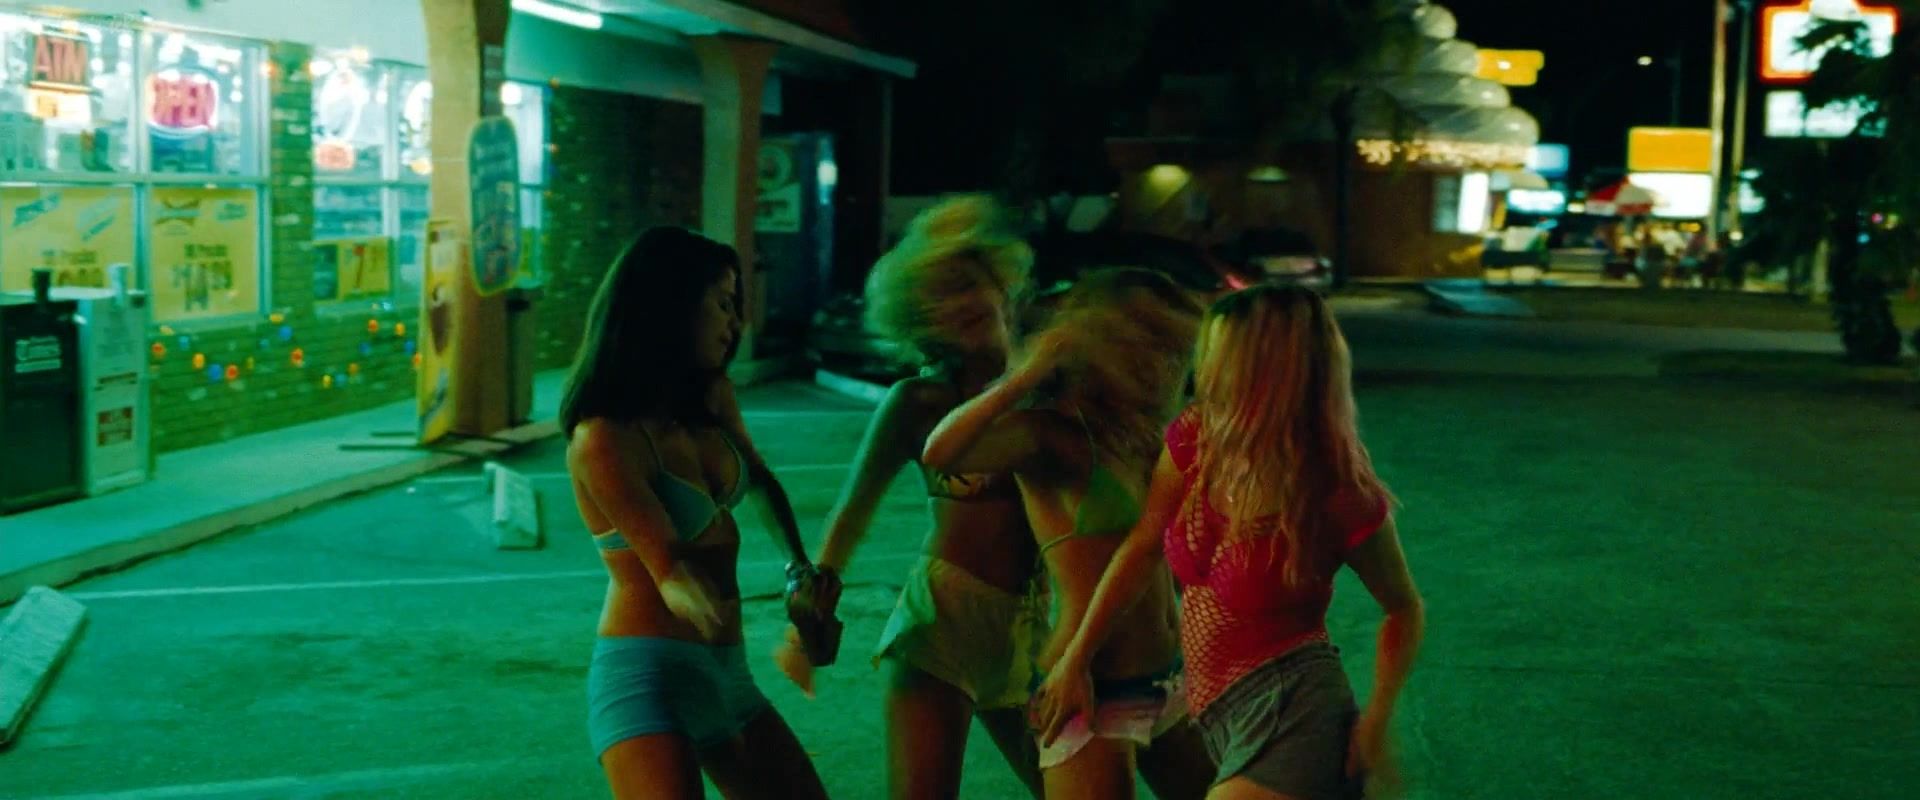 Free Oral Sex Selena Gomez nude in Spring Breakers (2013) Awesome - 1